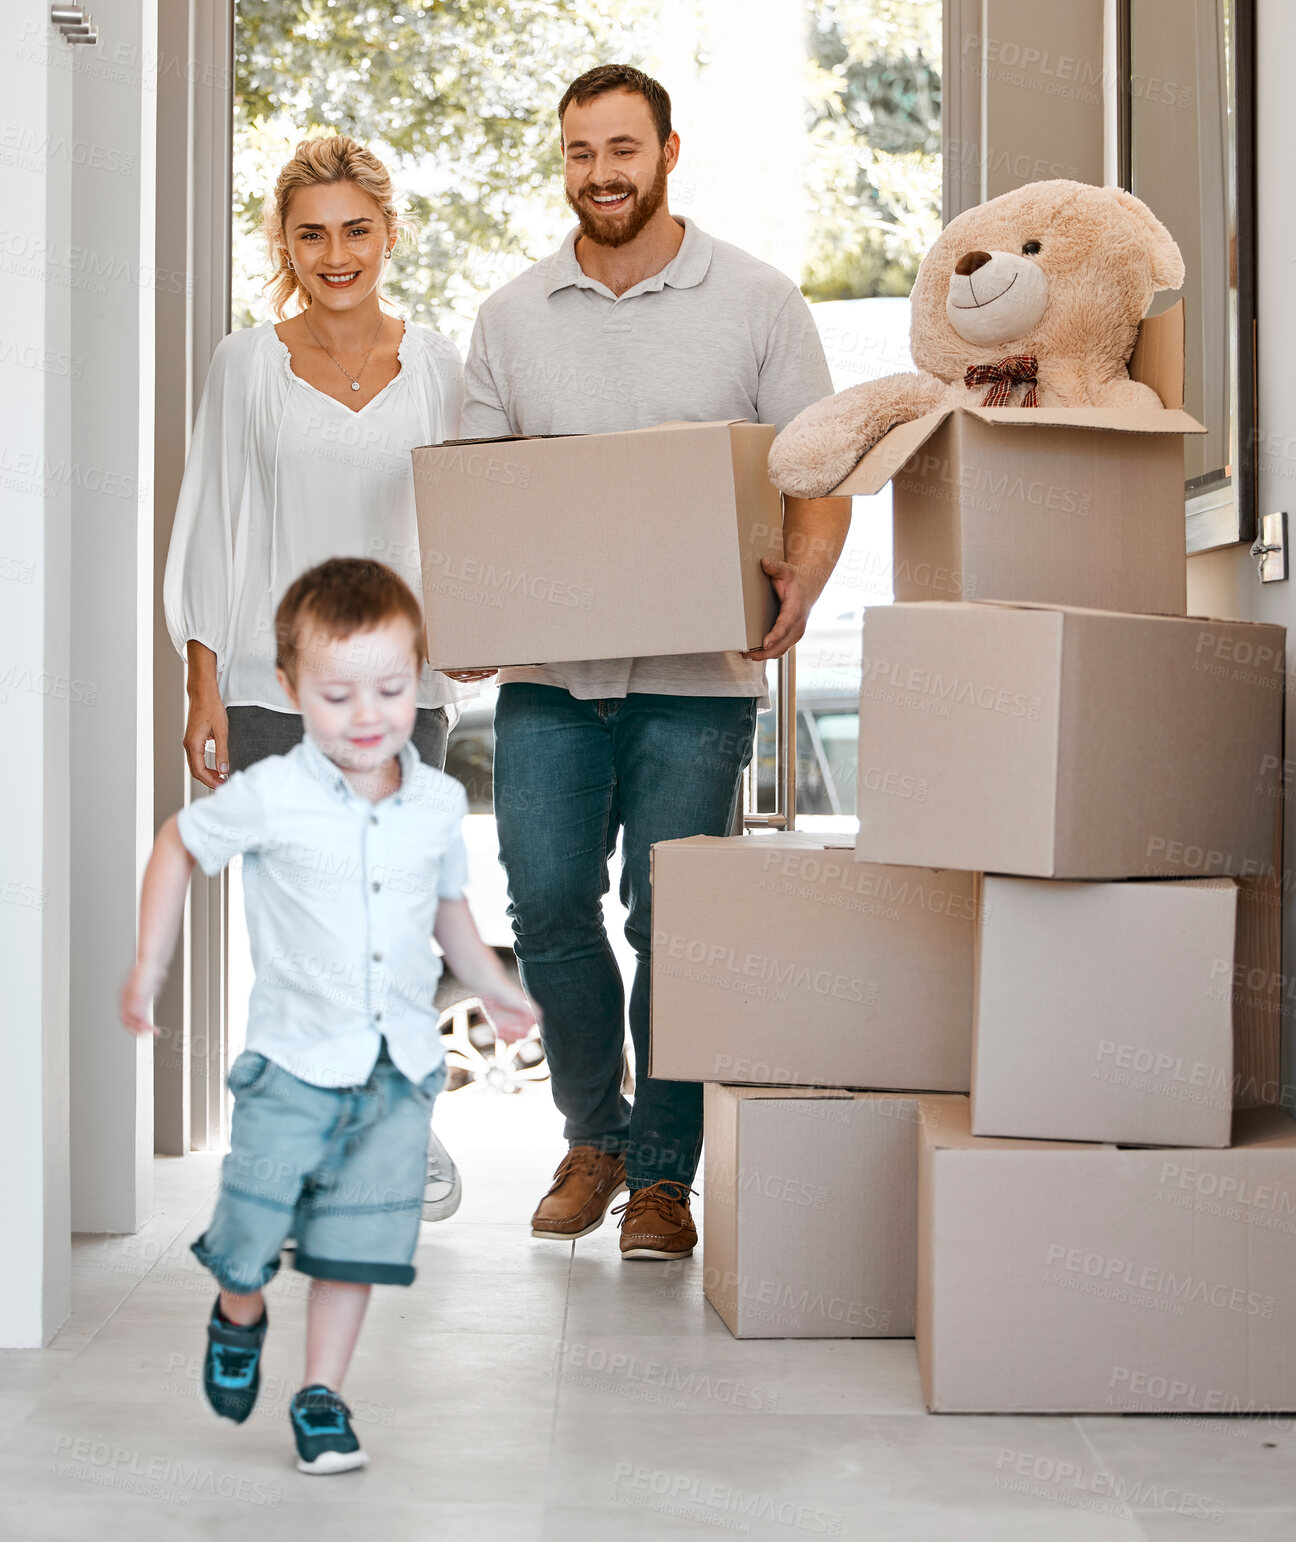 Buy stock photo Excited little boy running into his new home. Happy family moving into new purchased property. Father carrying box, moving into his house. Happy parents moving into their house with their son